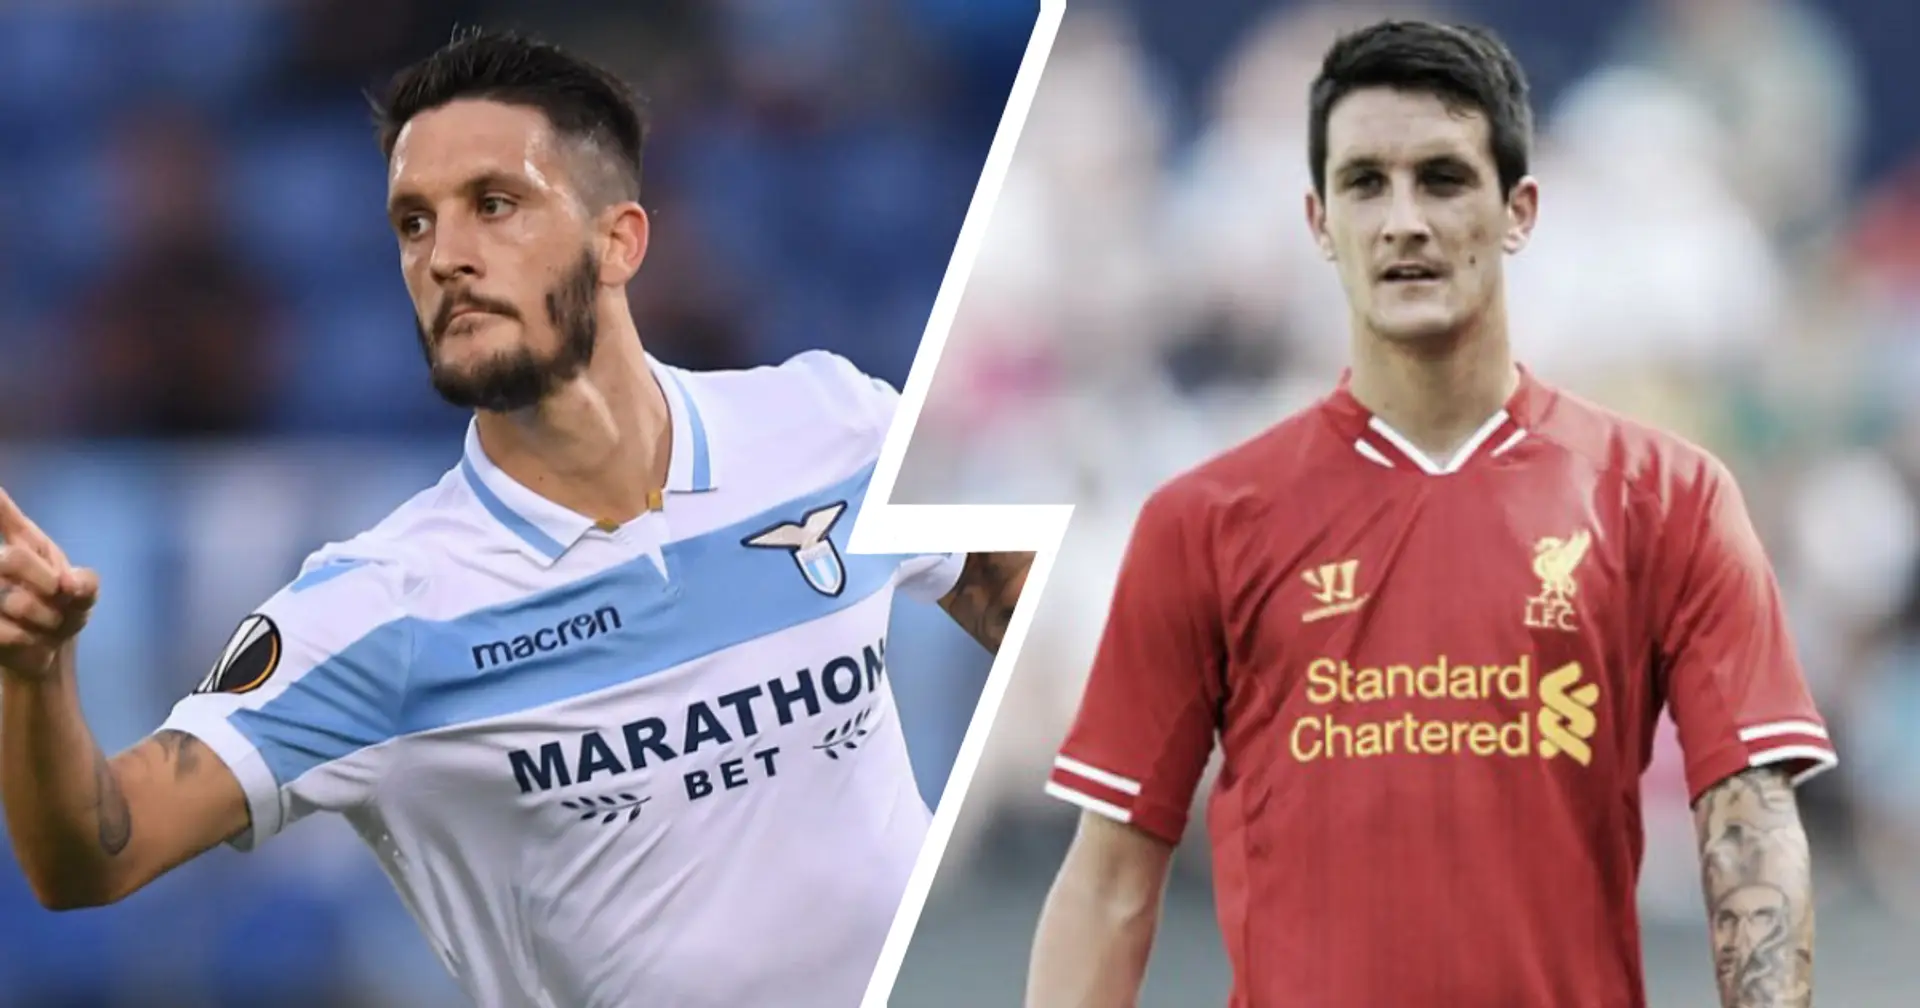 'Joining Lazio was the best decision of my life:' Former Liverpool player has no regrets after leaving the Reds